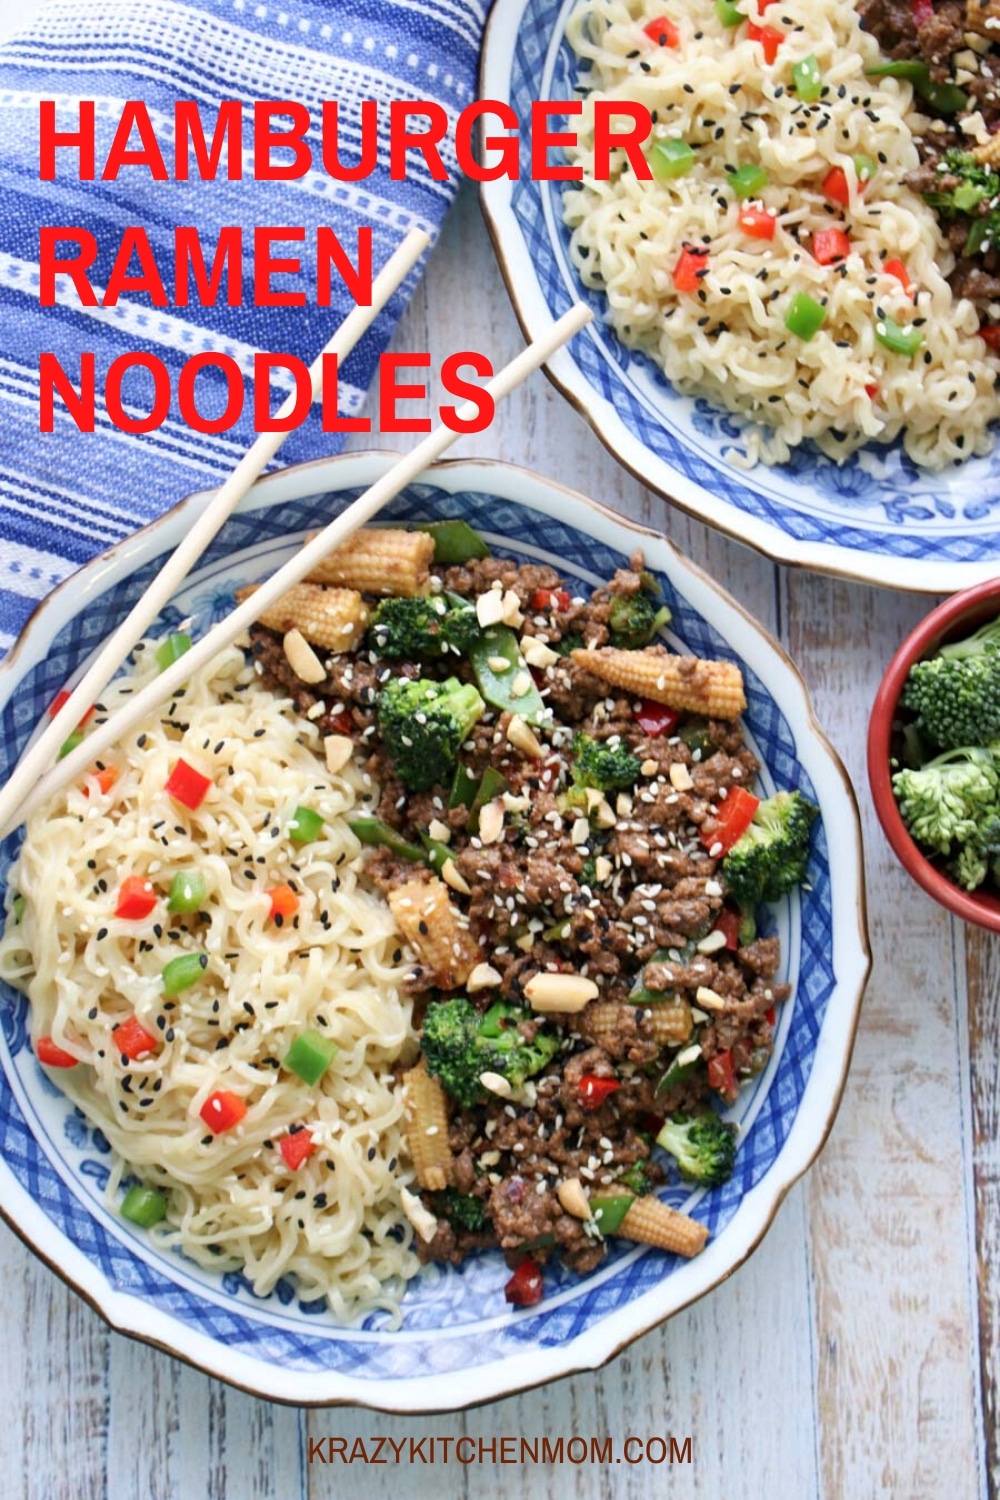 All you need to make Hamburger Ramen Noodles is ground beef, some veggies, some Asian flavors, and ramen noodles.  via @krazykitchenmom